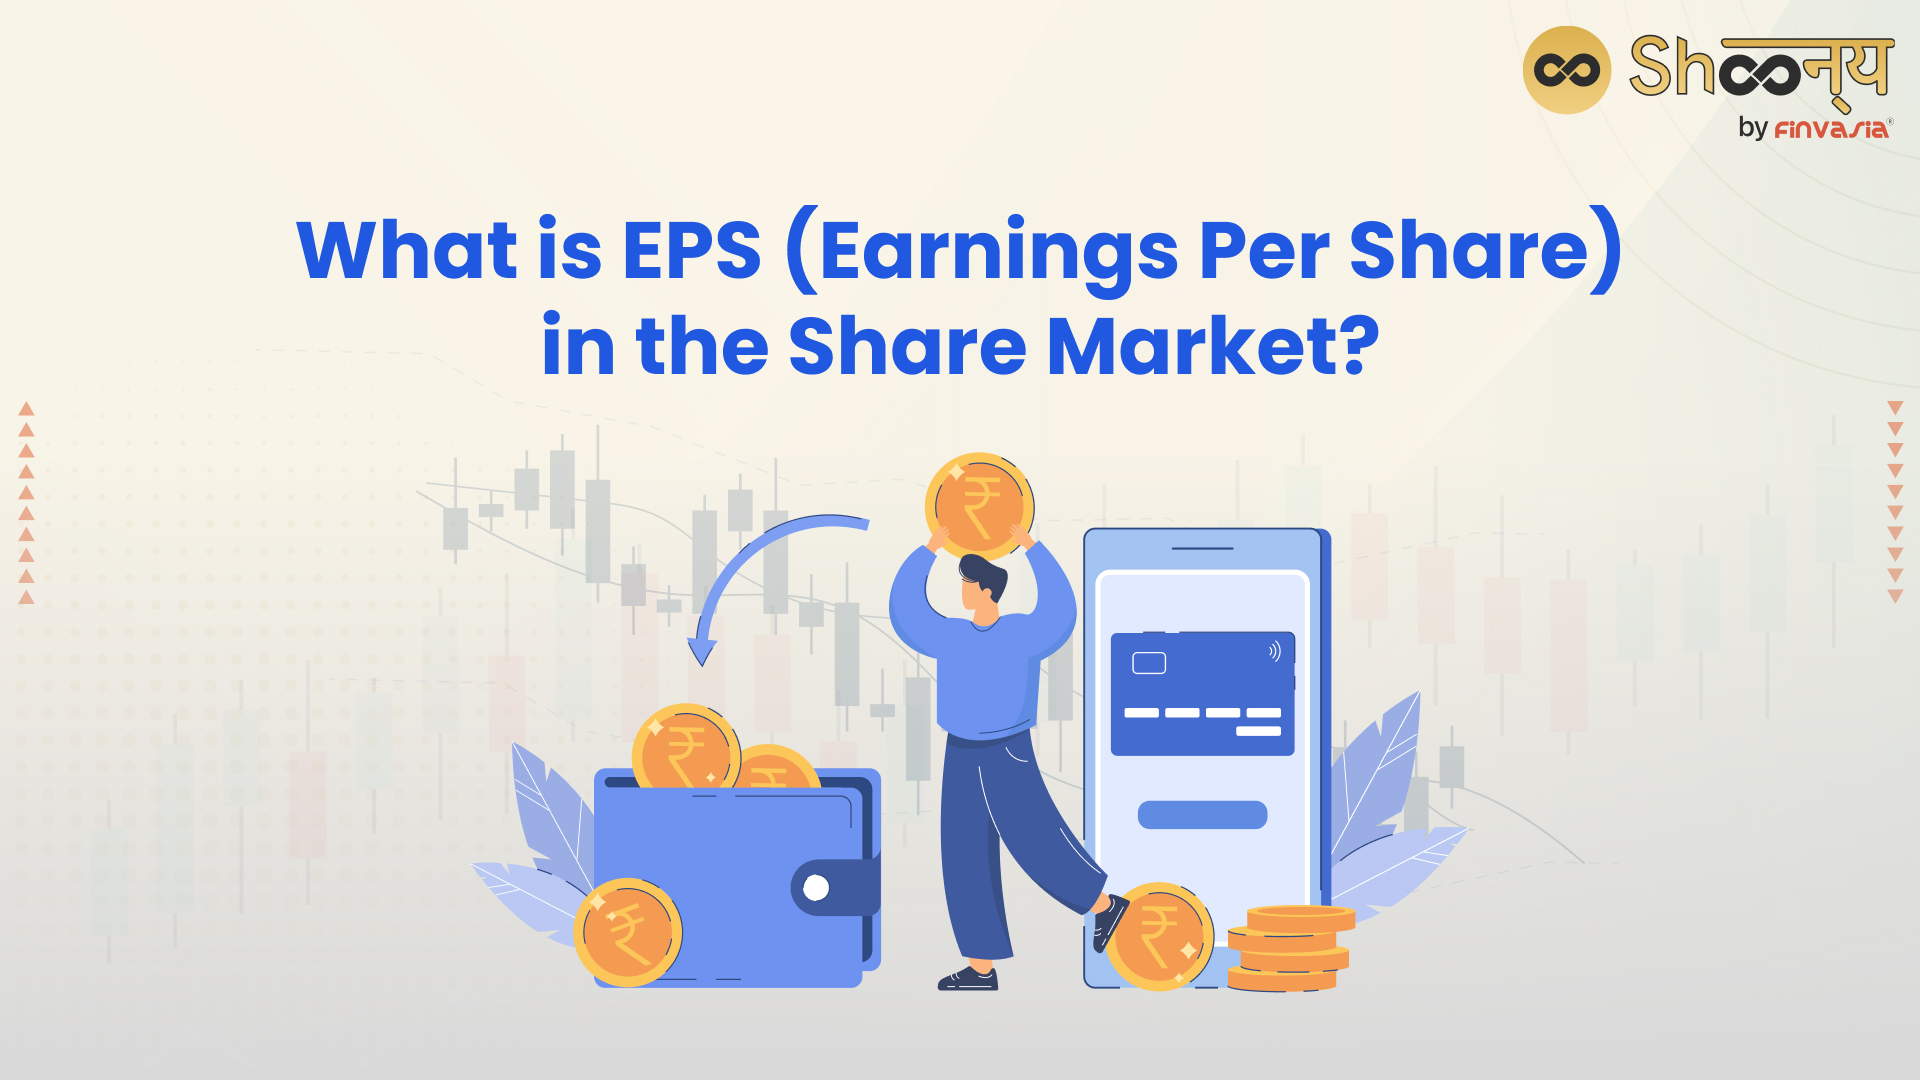 What is EPS (Earnings Per Share)?